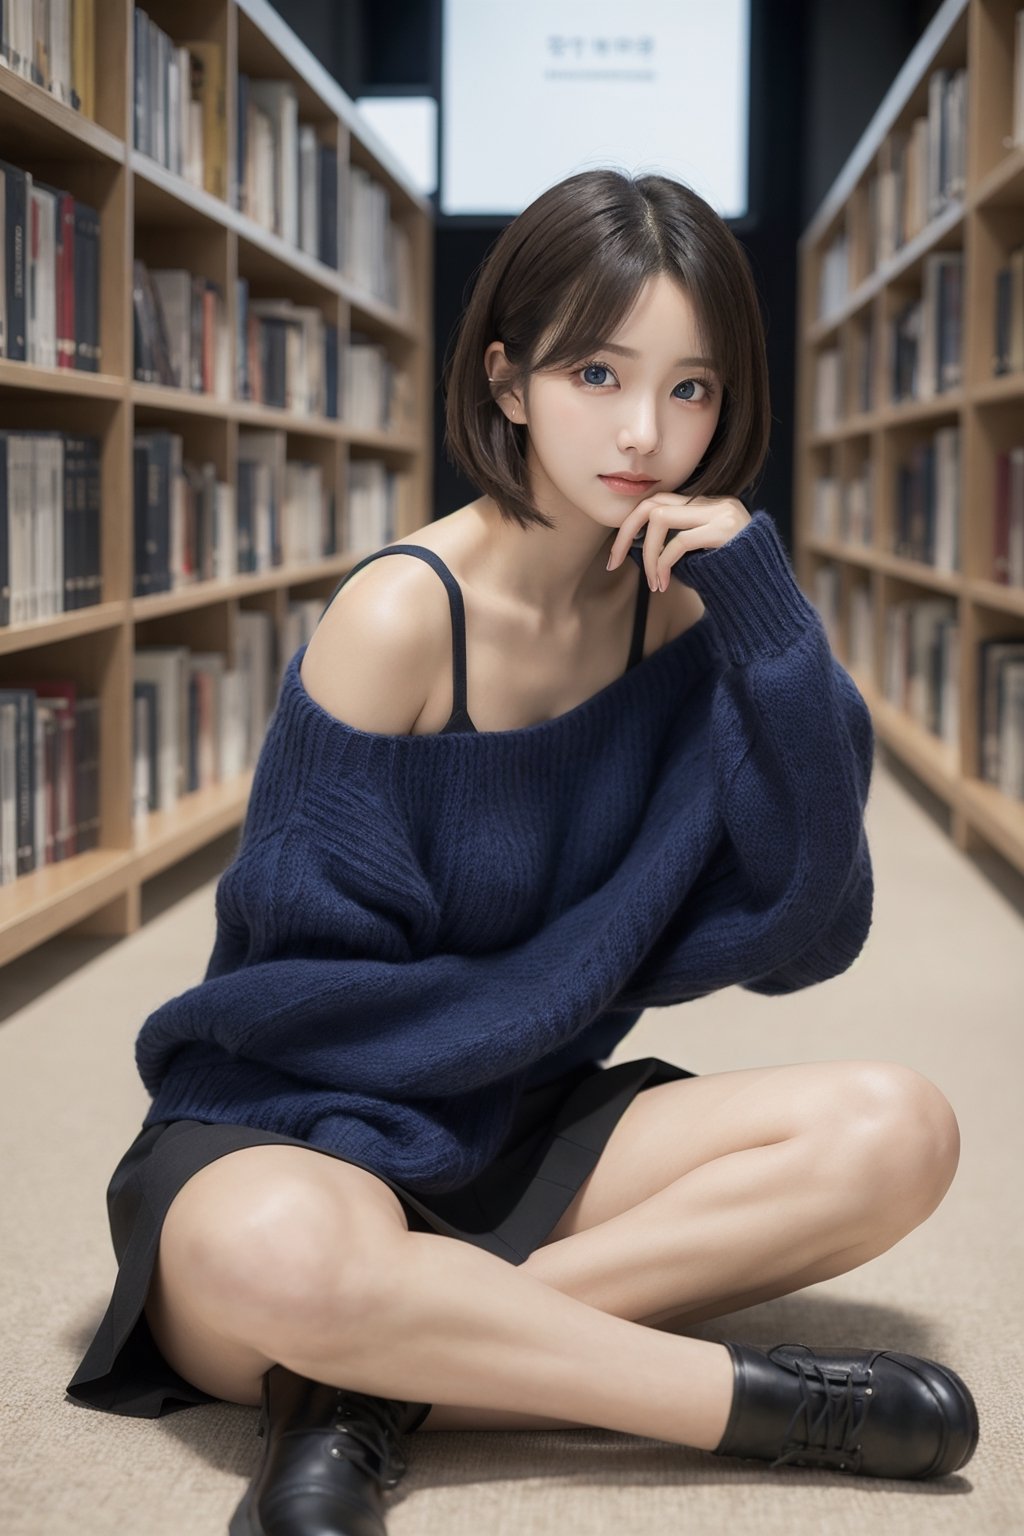 8K Cinema Reality, High resolution, high quality, A A girl sitting on the library floor reading a book, open shoulder Wearing a sweater, Skirt, Korean style, Shy expression, Full-body shot, small natural finger, v-cut hair, blue_eyes